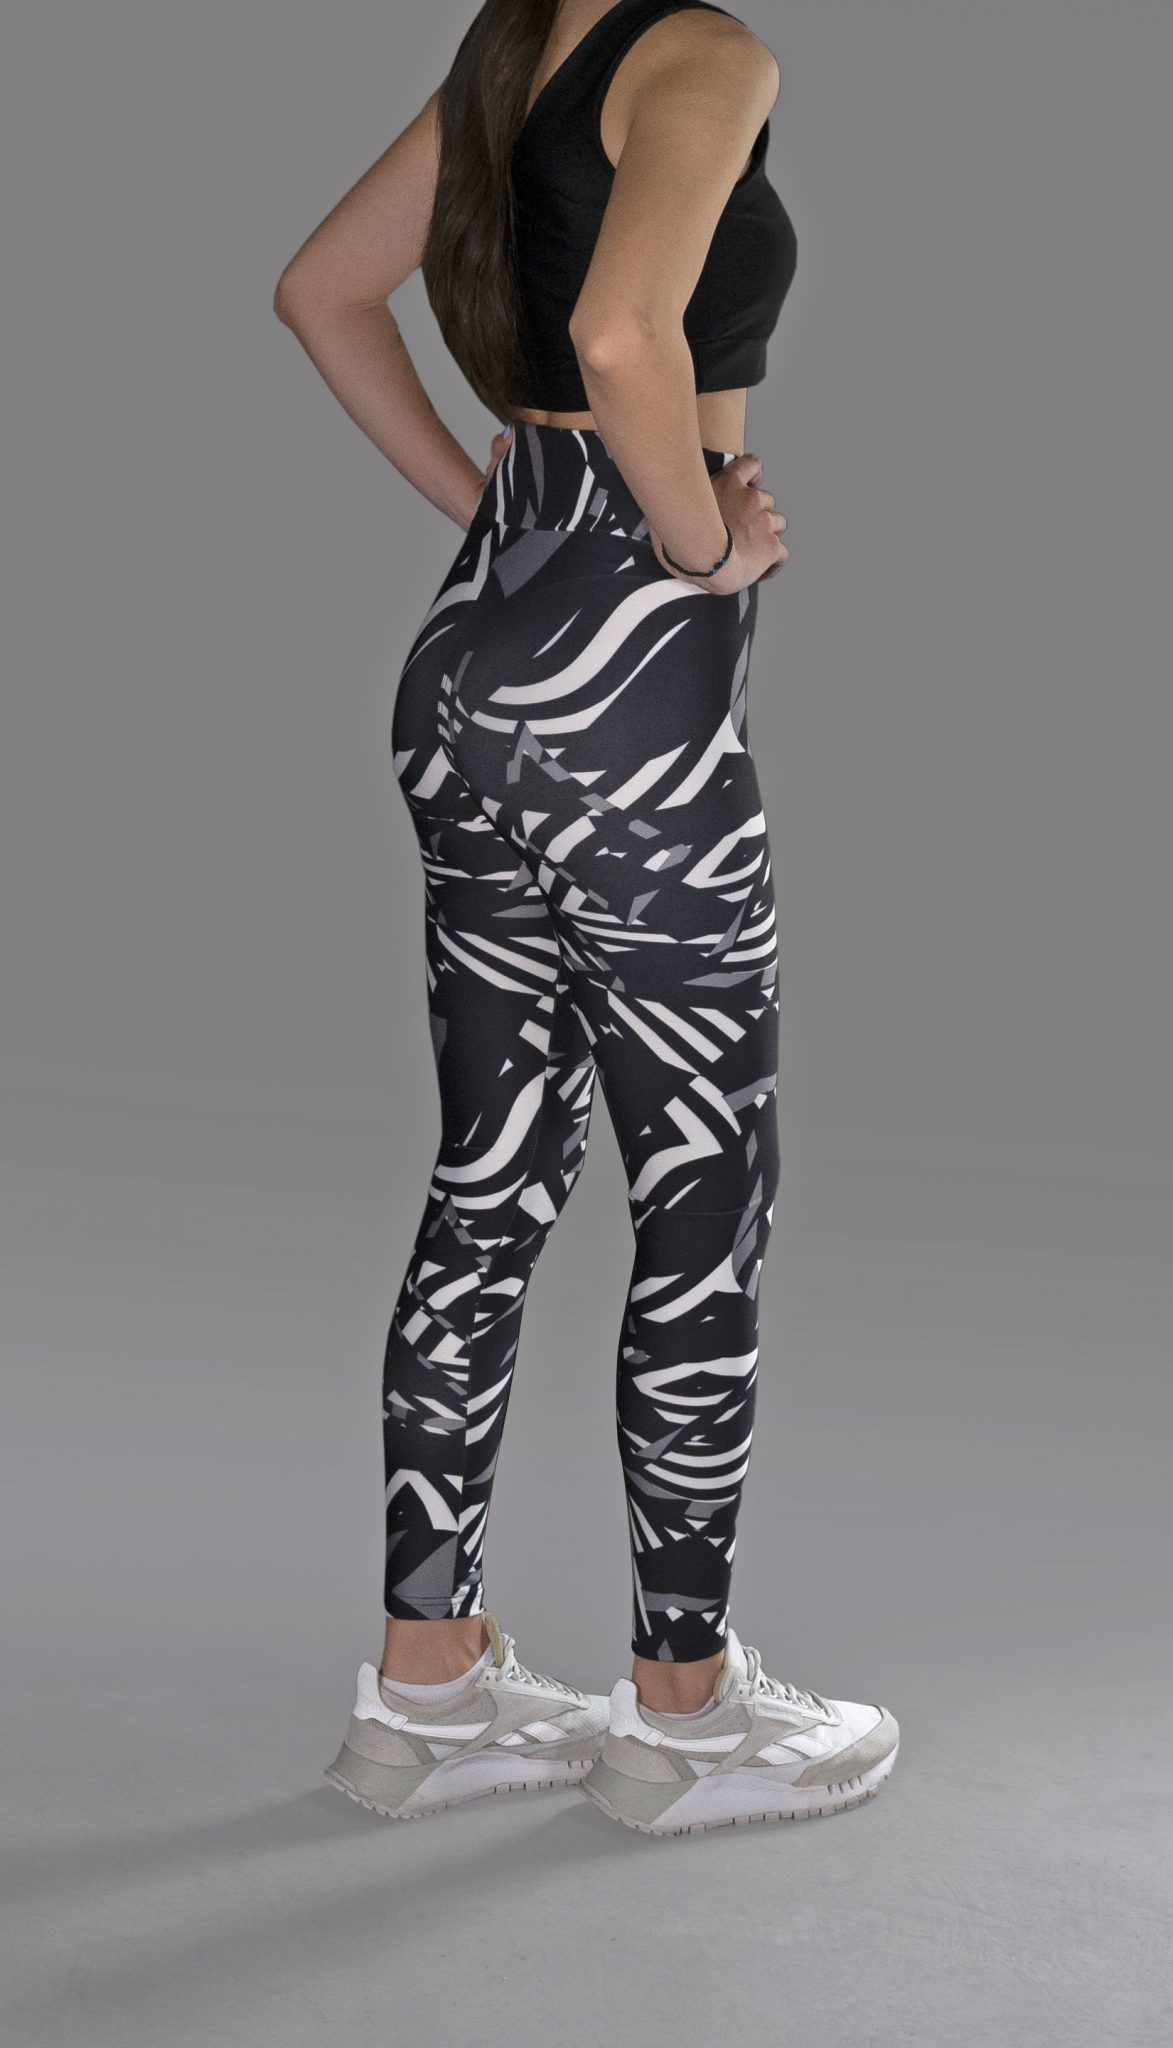 Amazon.com: Overstyled Women's Leopard Black and White Printed Leggings,  Activewear Sweatpants, Soft High Waisted Yoga Pants : Overstyled: Clothing,  Shoes & Jewelry